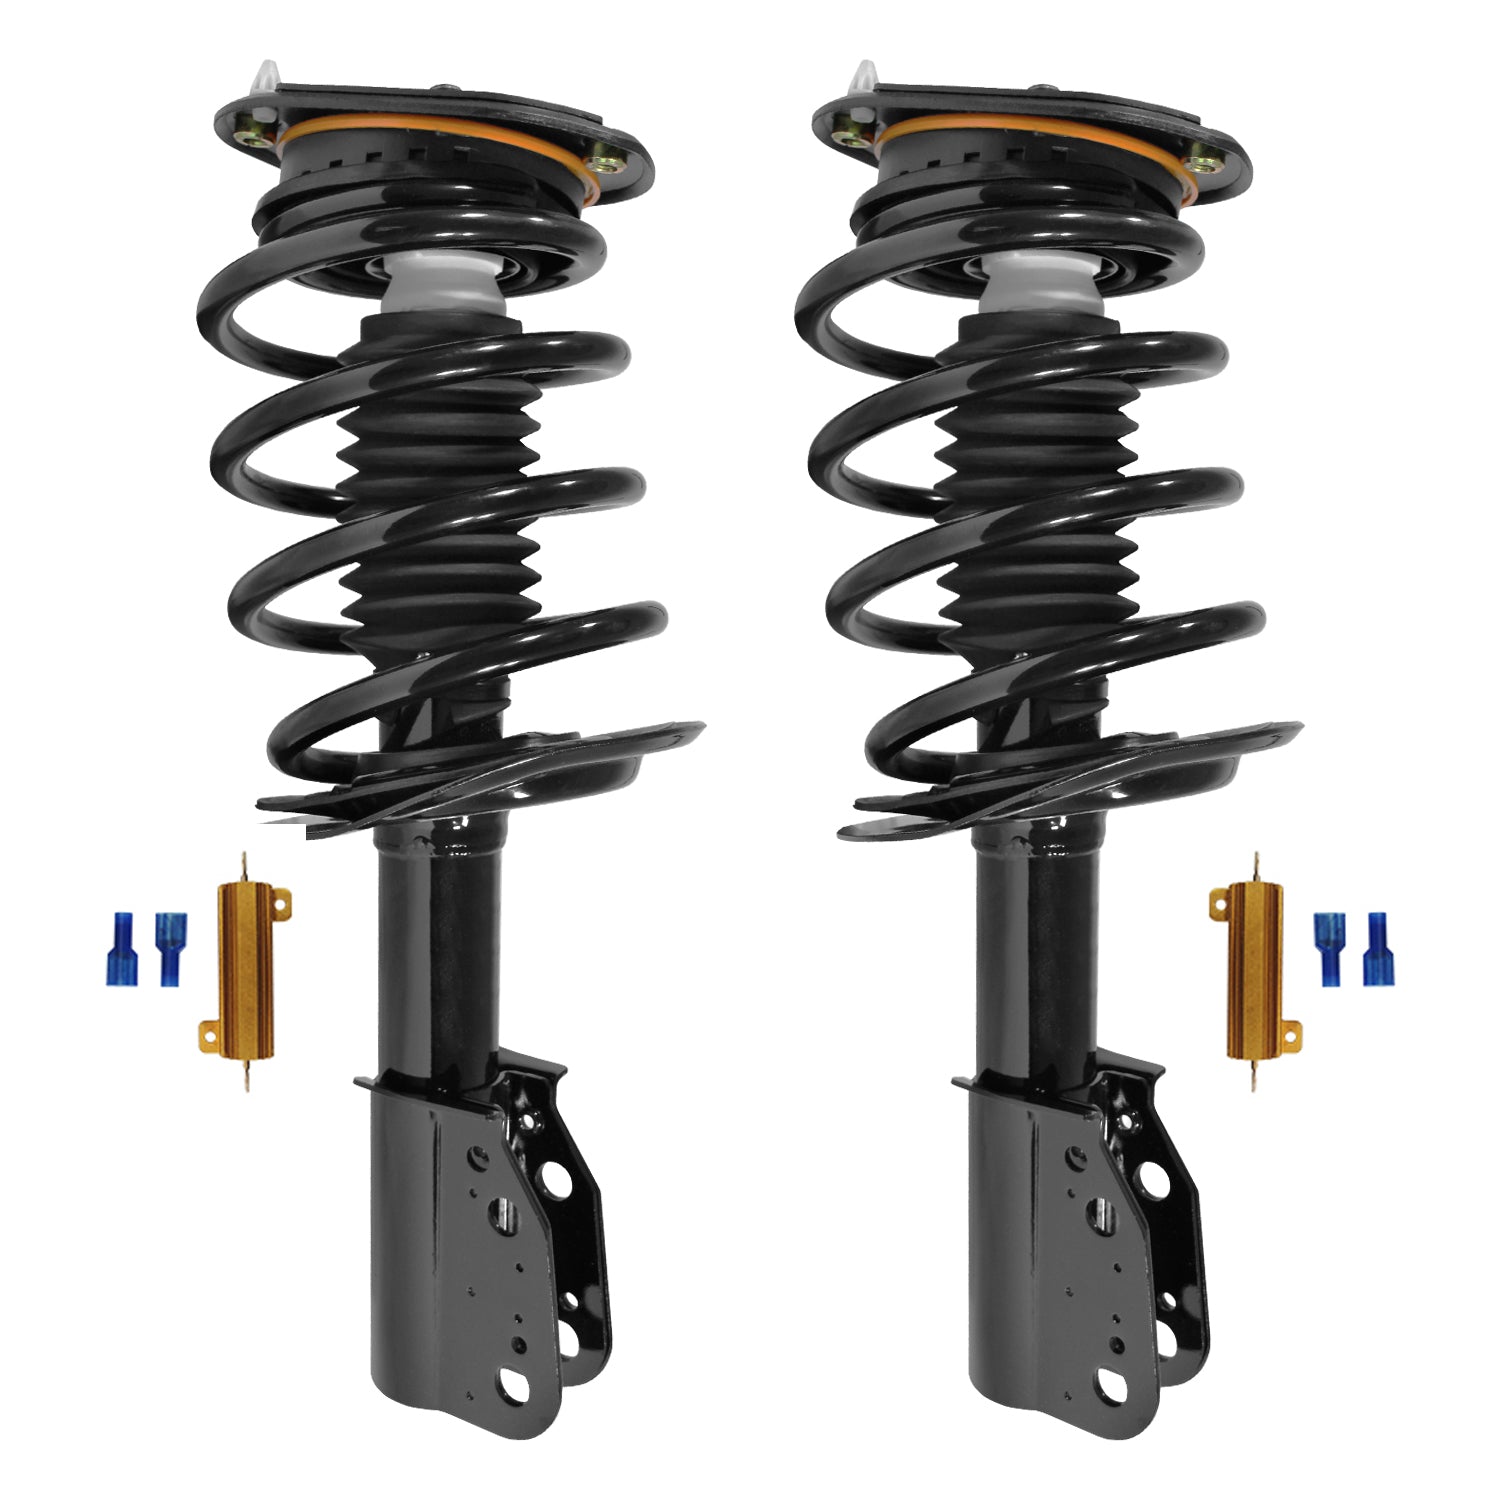 Unity 61700C Front Active to Passive Suspension Conversion Kit for Buick Lucerne Cadillac DTS FWD